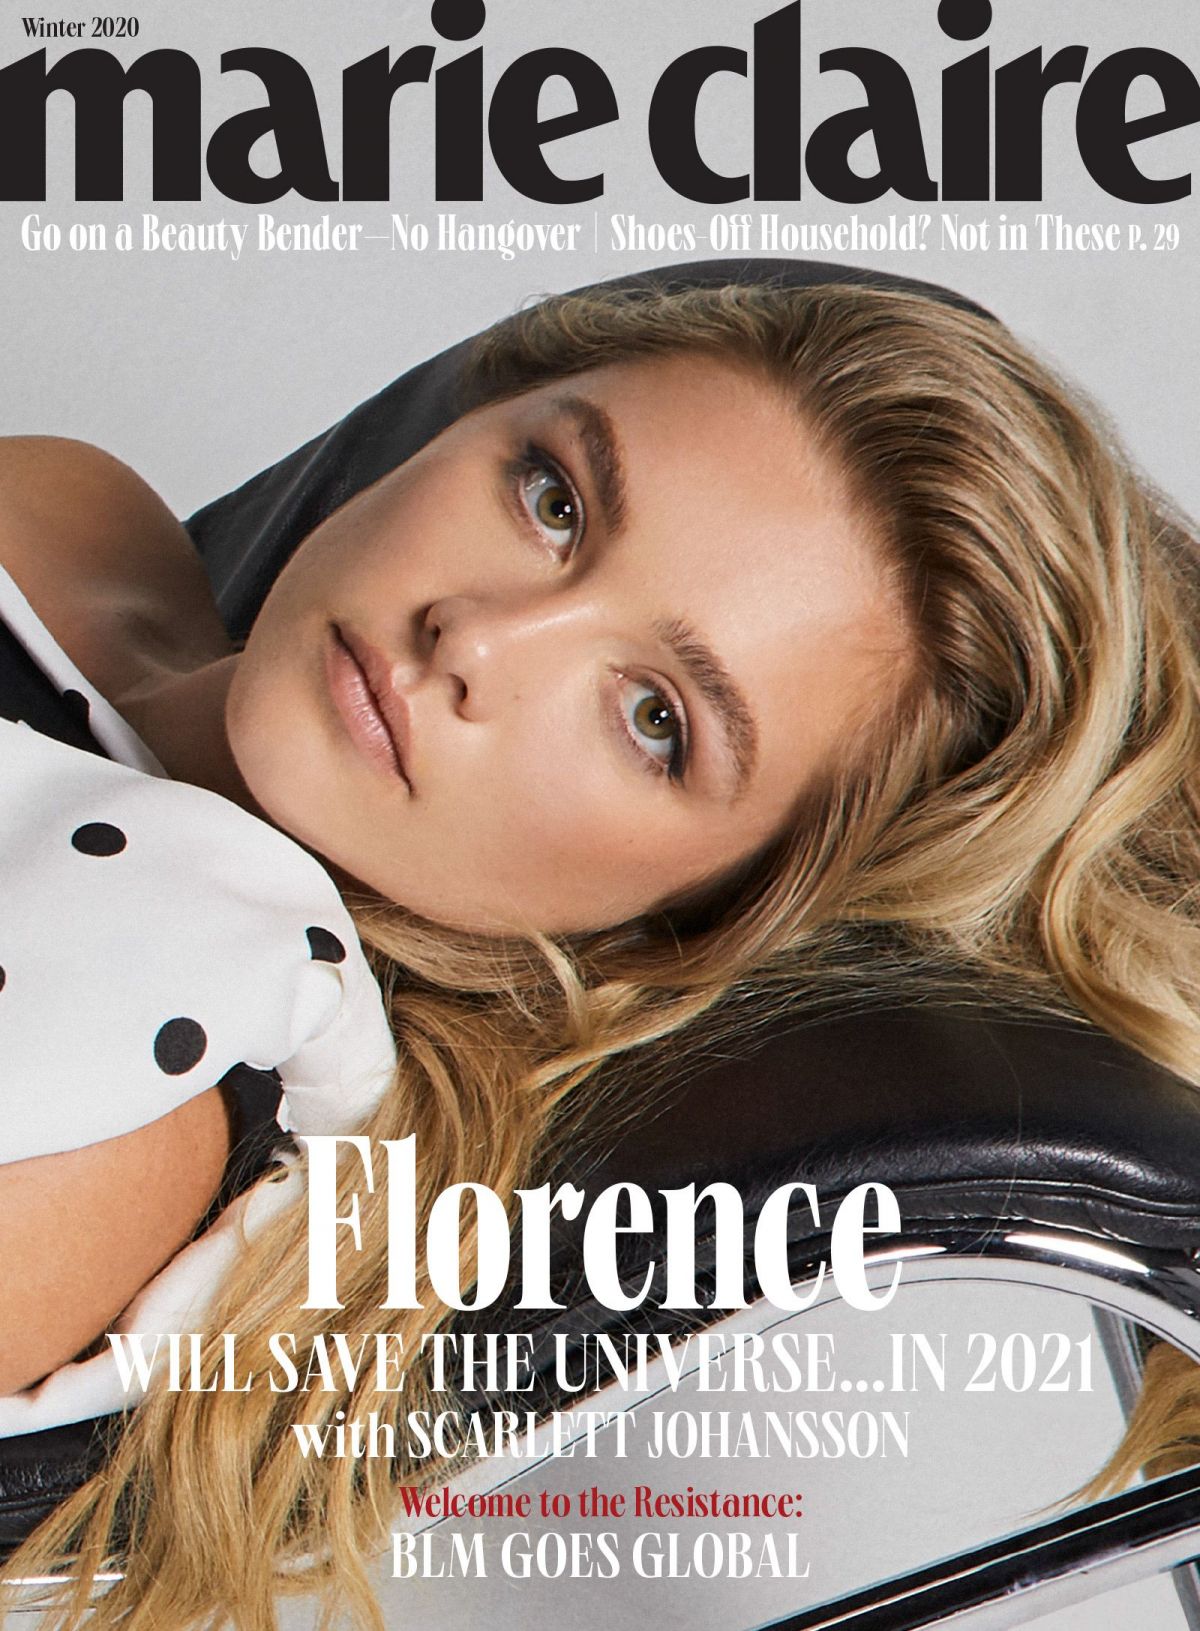 florence-pugh-in-marie-claire-magazine-winter-issue-2020-0.jpg